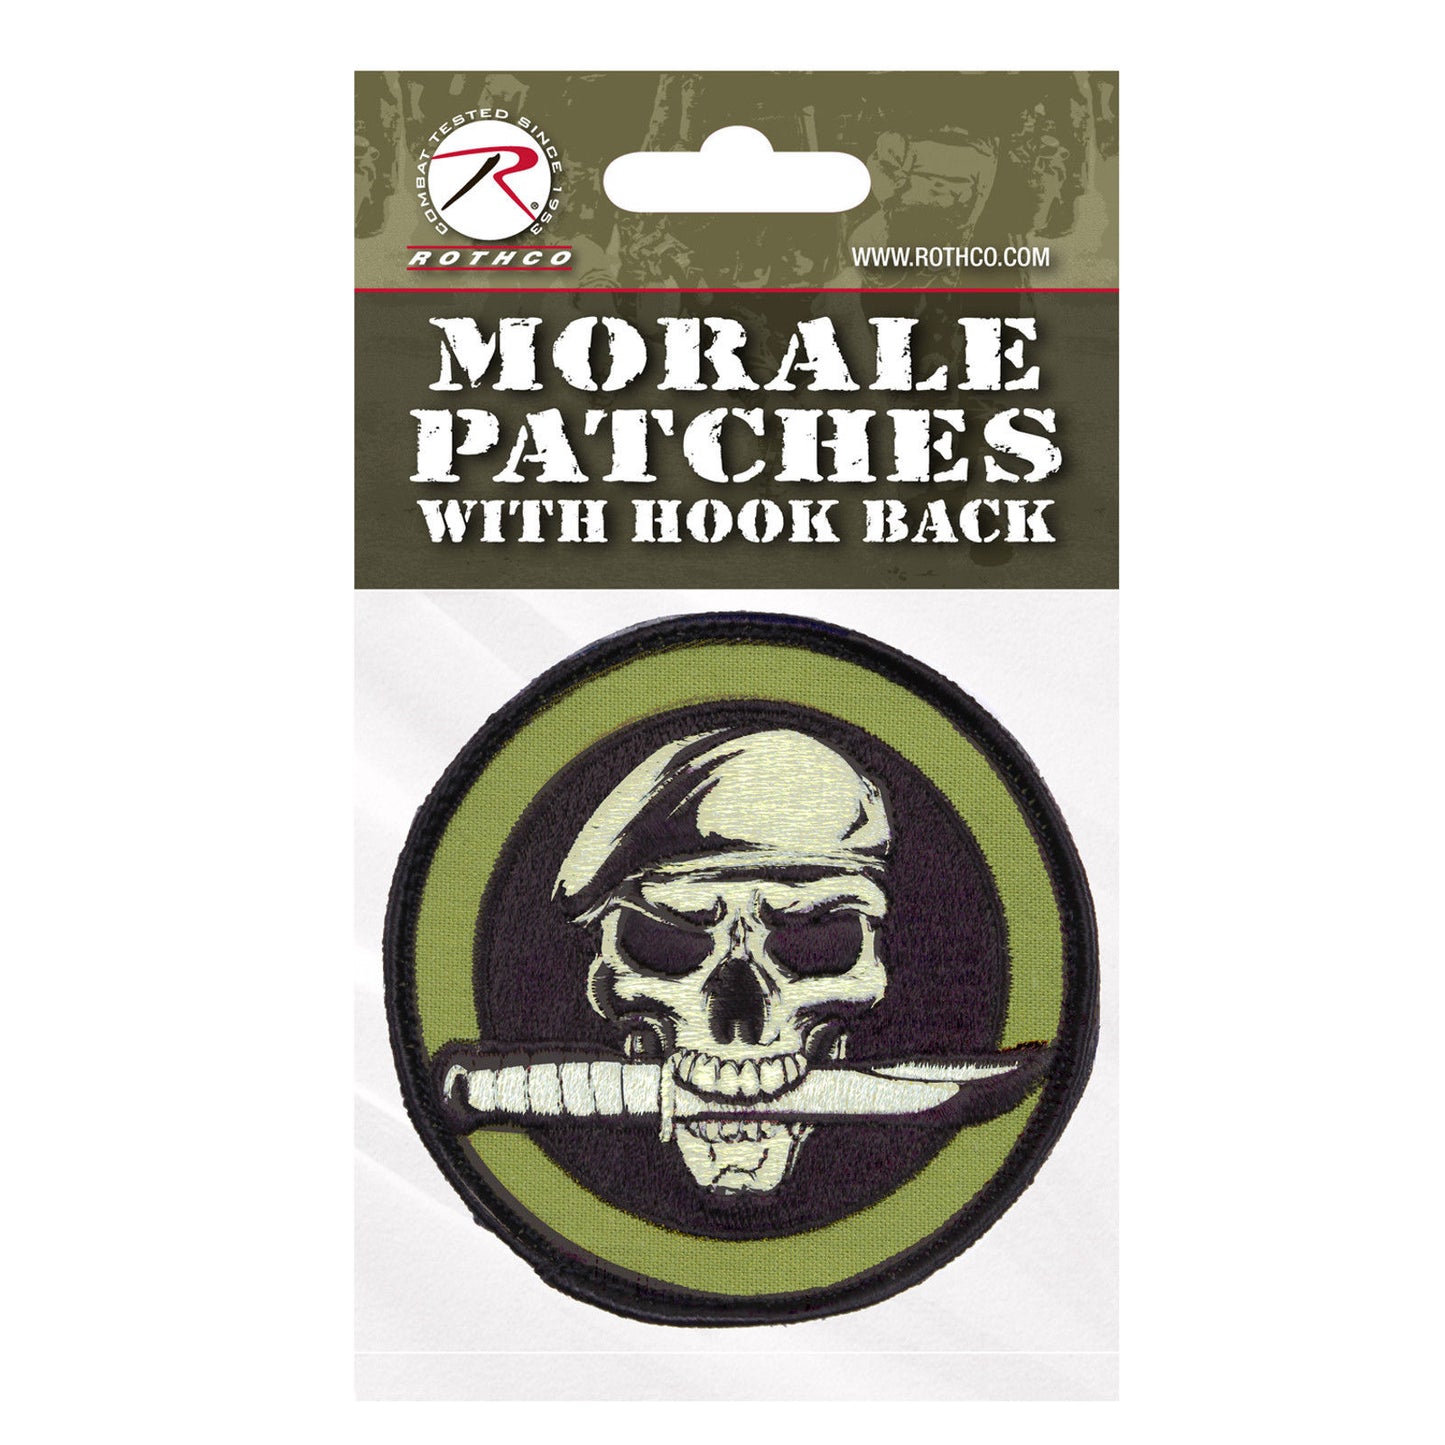 Rothco Skull & Knife Morale Patch - 3¼" Round Hook & Loop Patch